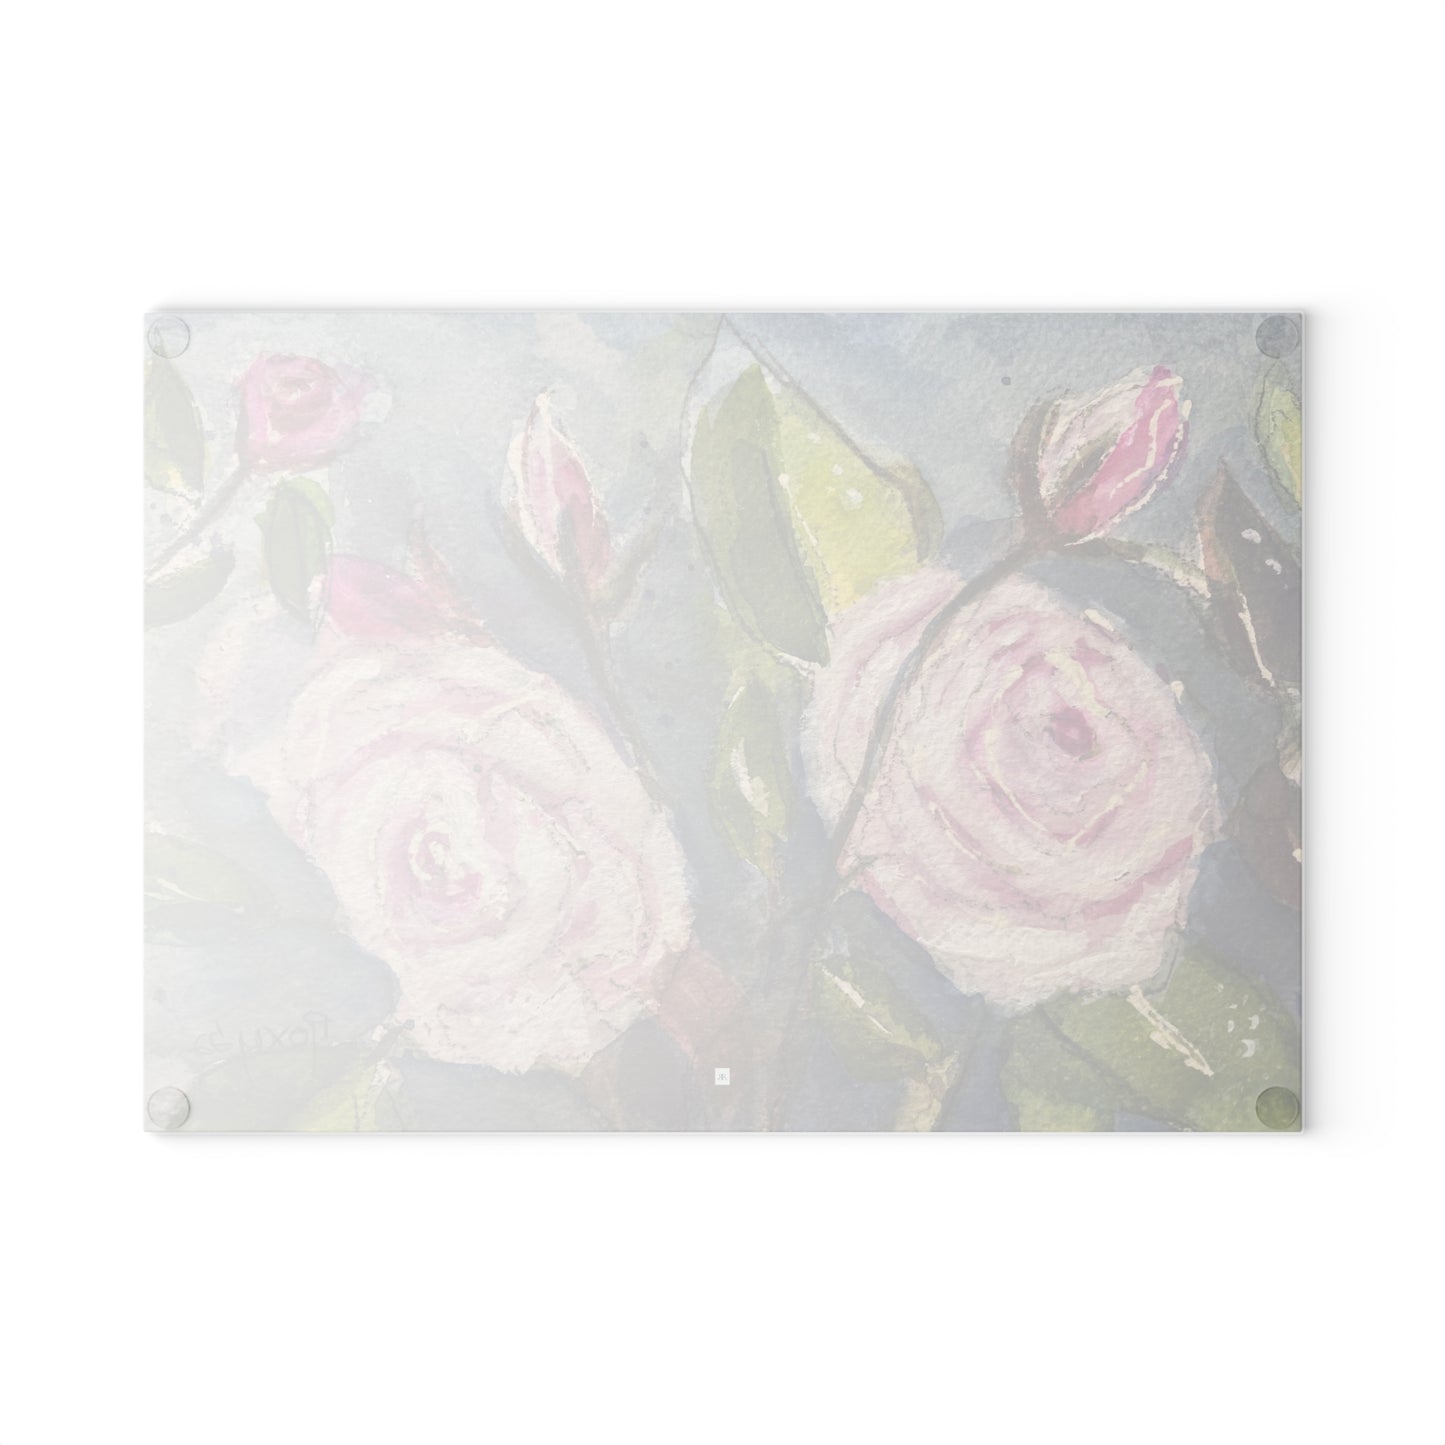 Fluffy White Roses Glass Cutting Board